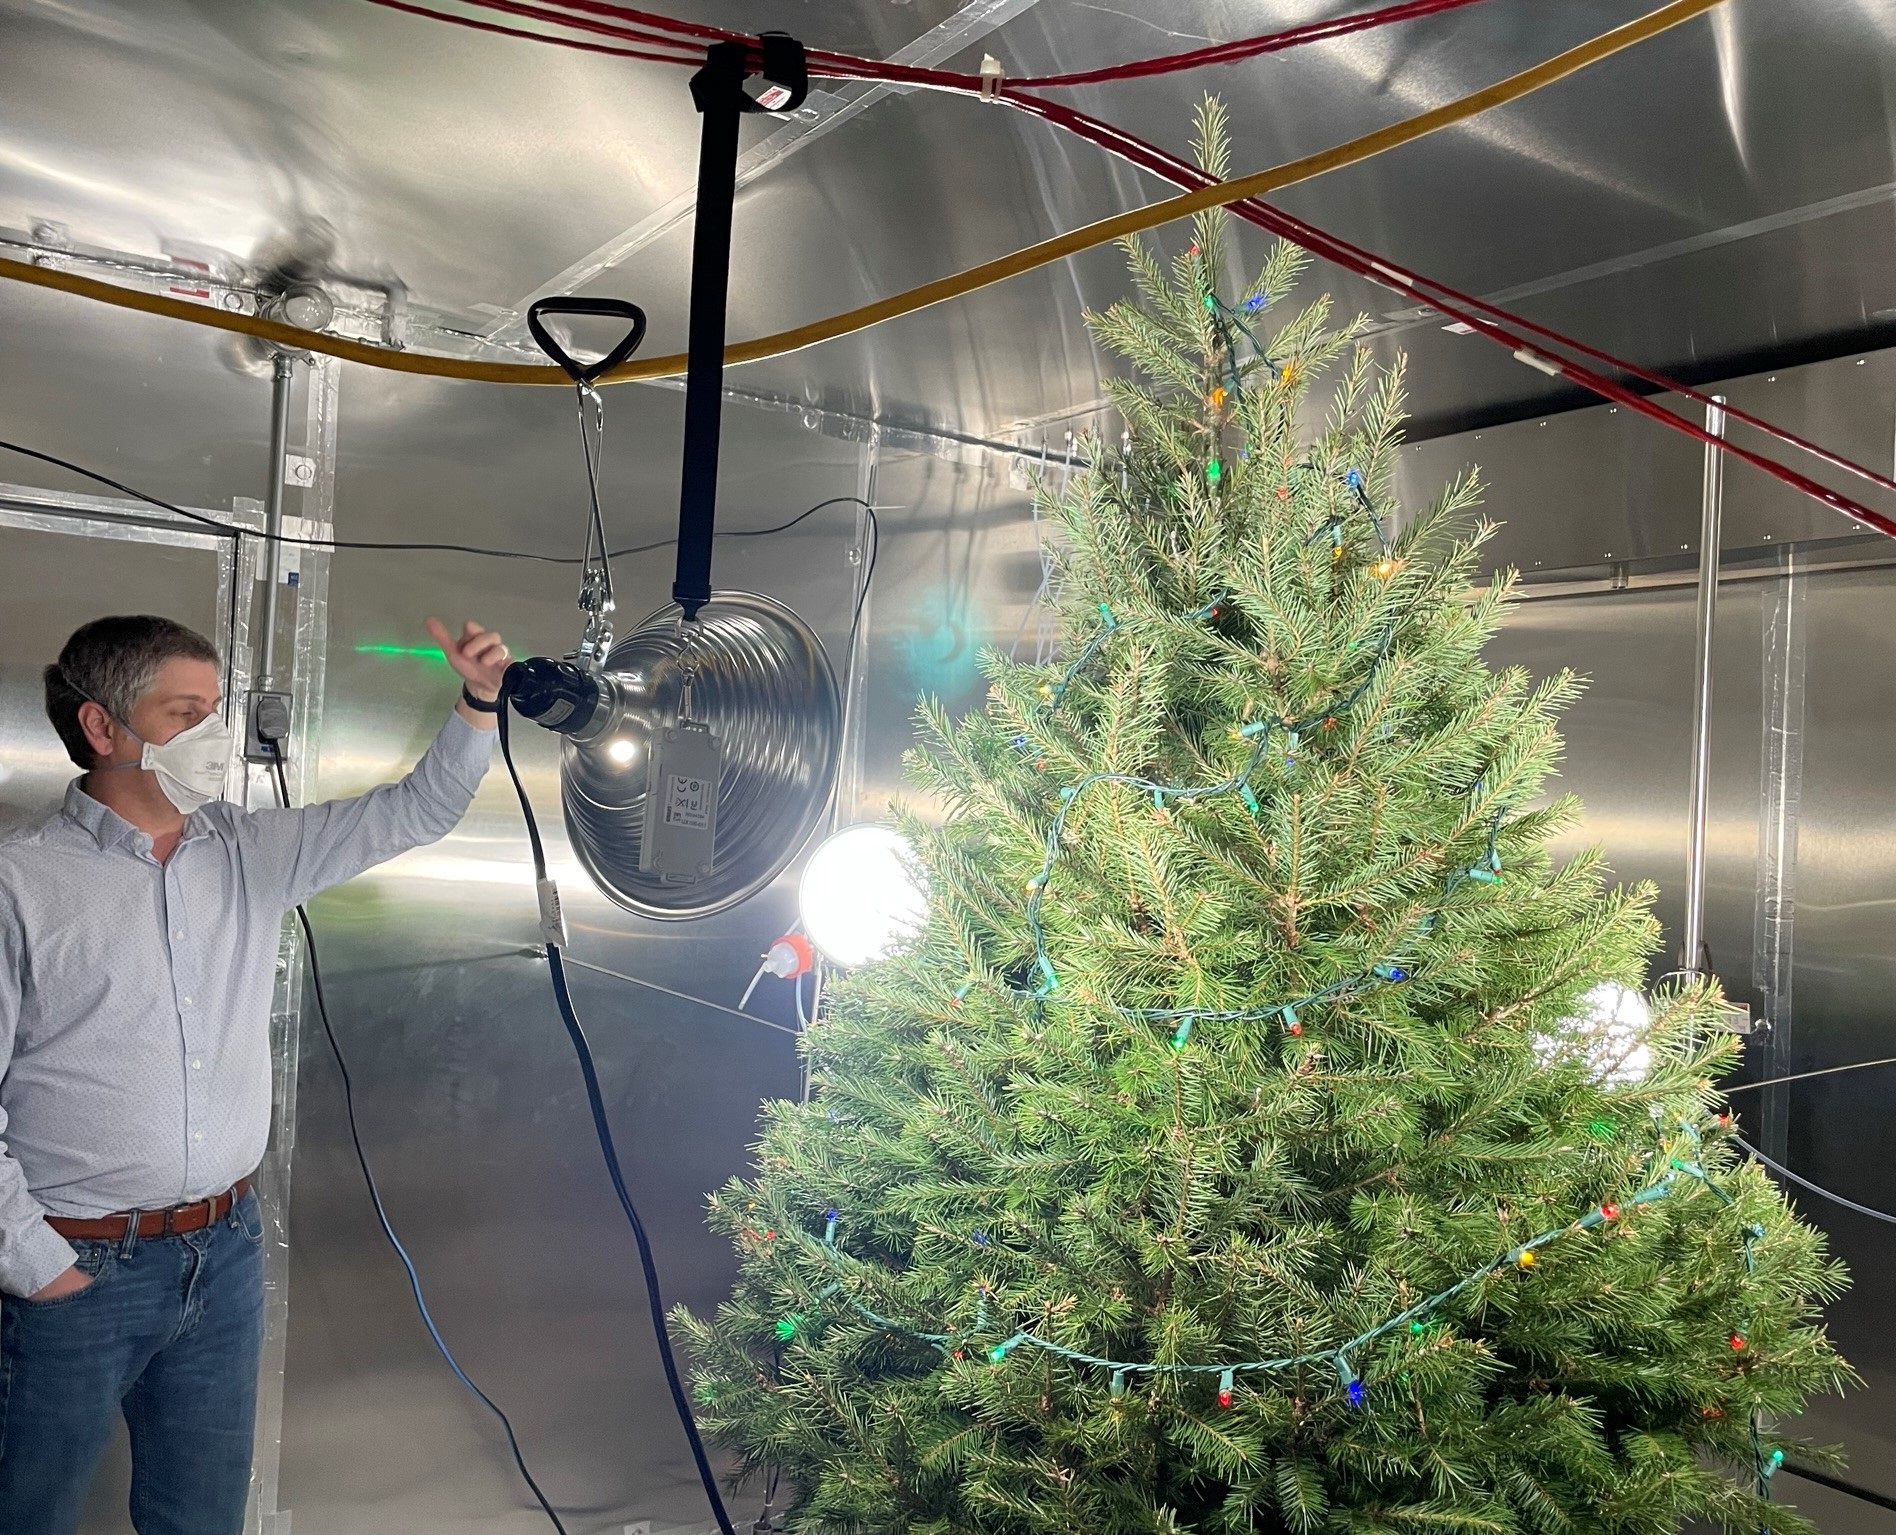 Live Christmas Trees Affect Indoor Air Chemistry, NIST Researchers Find